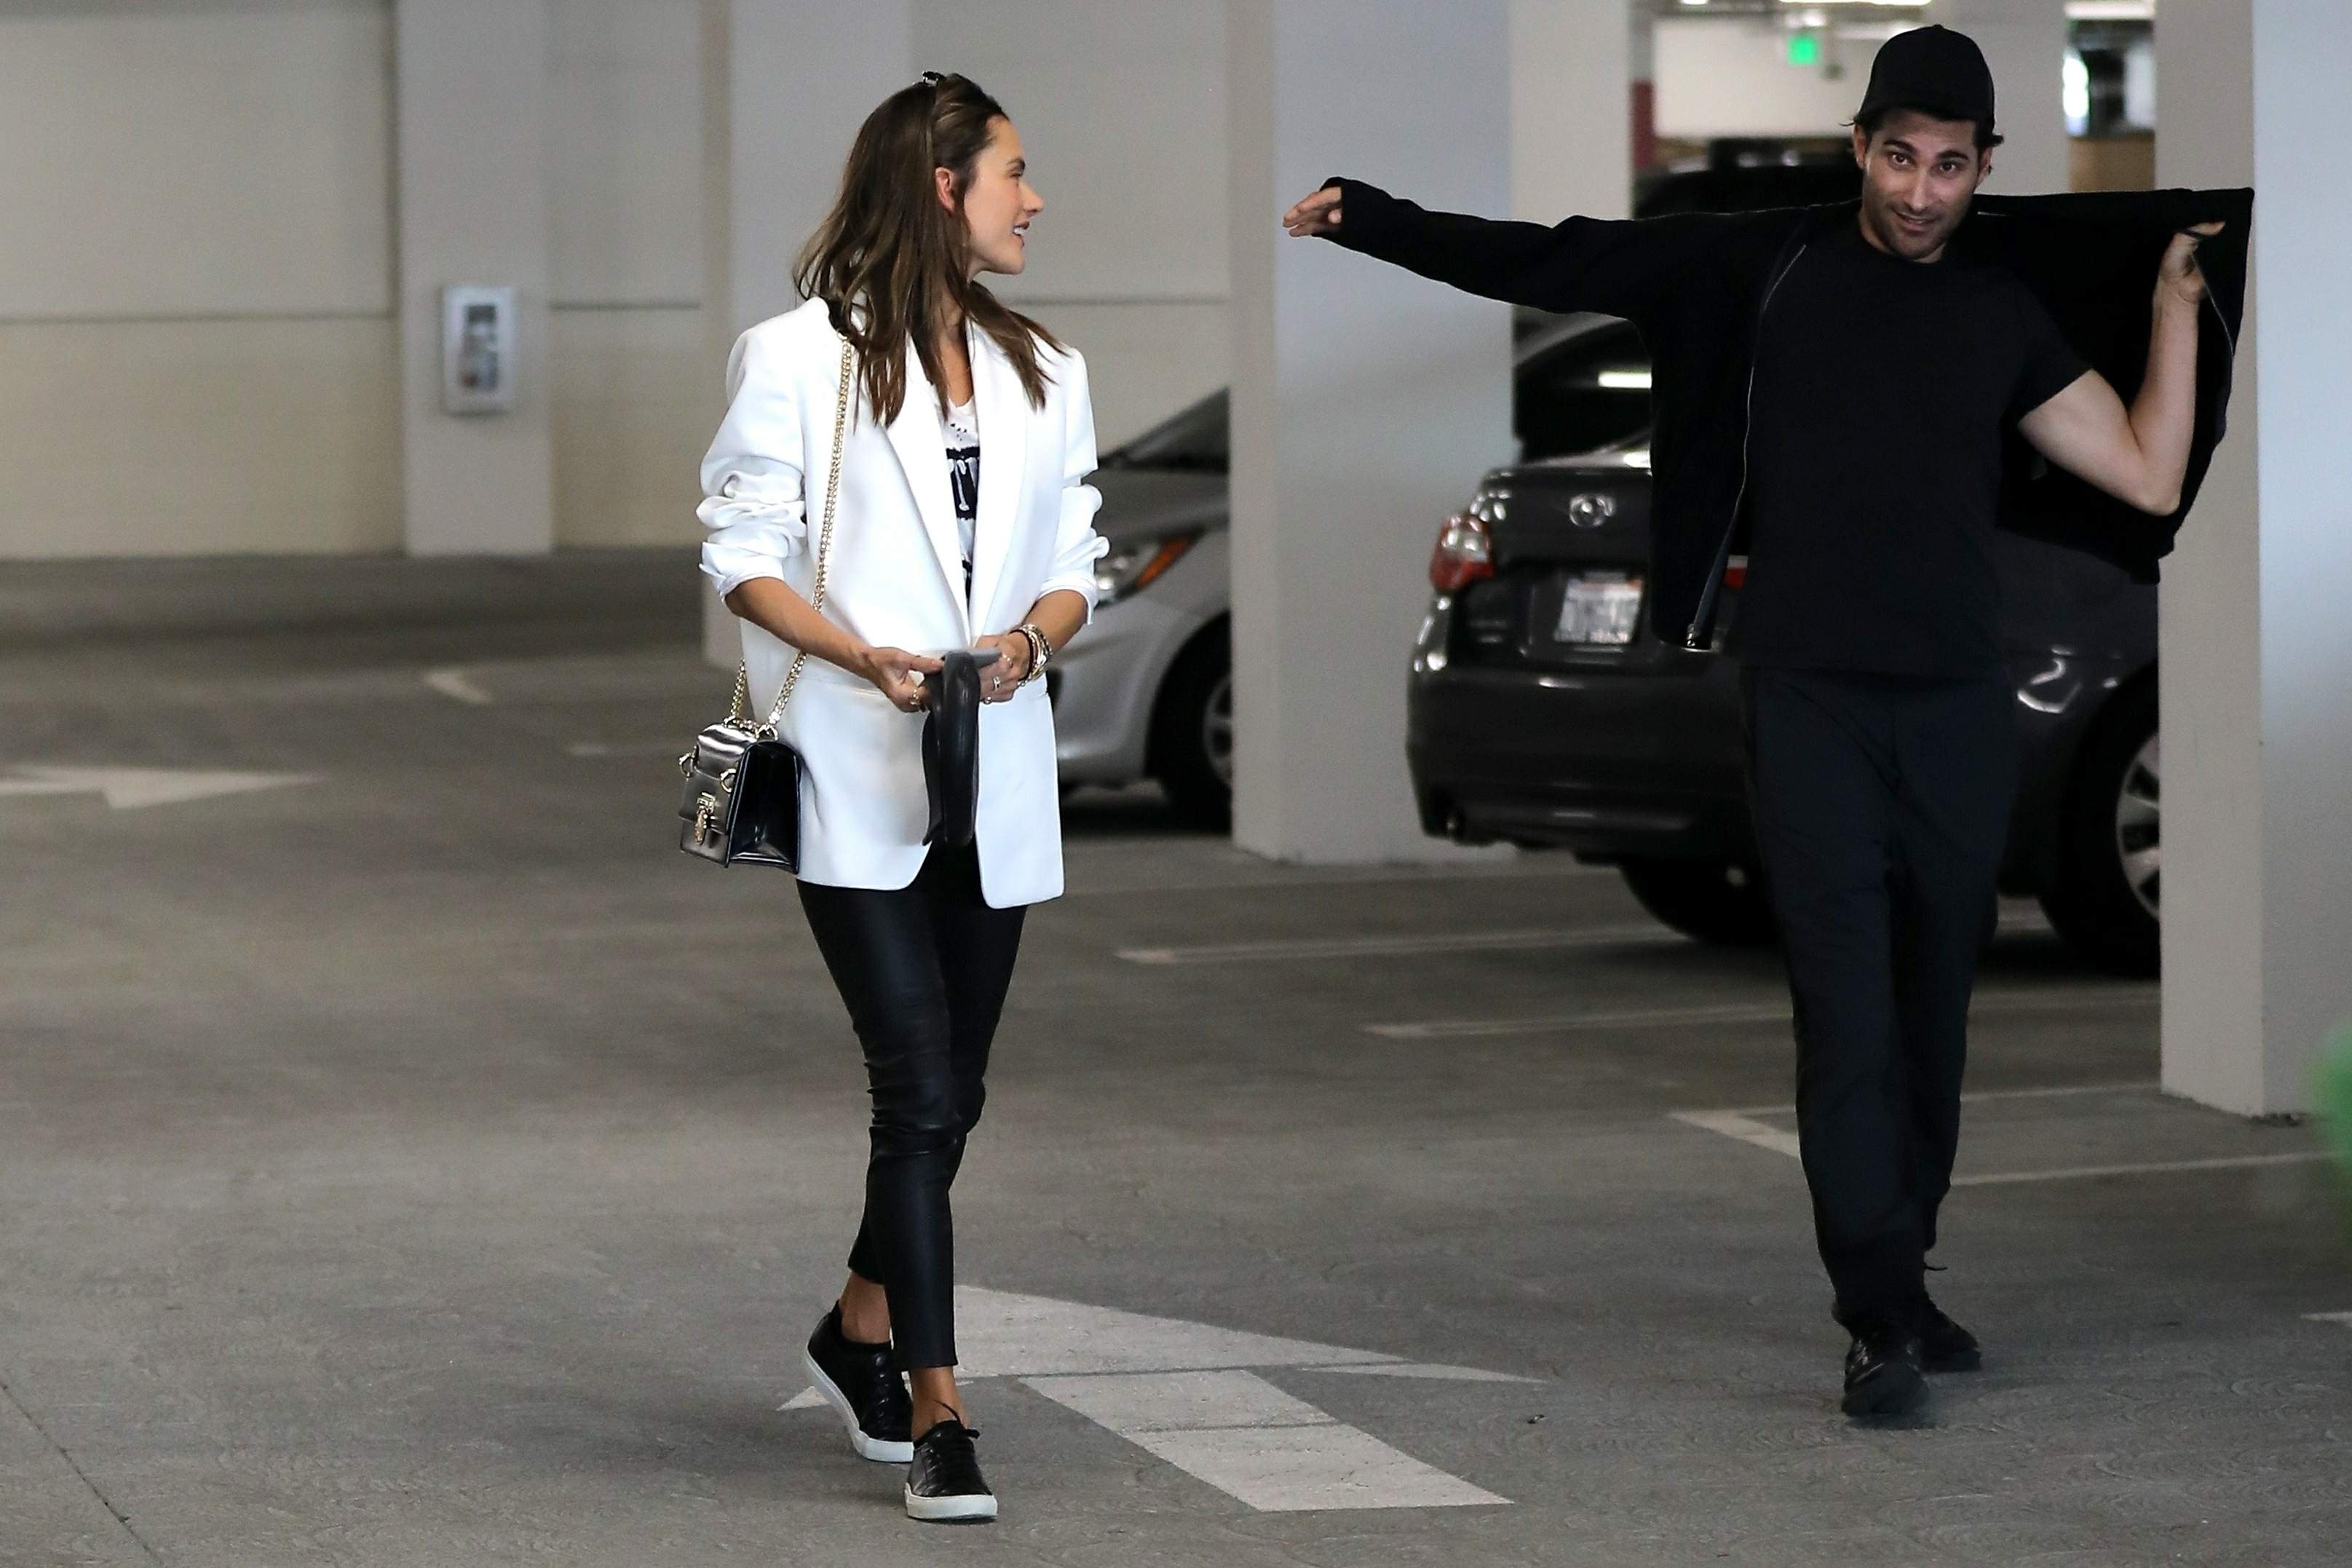 Alessandra Ambrosio has a lunch date